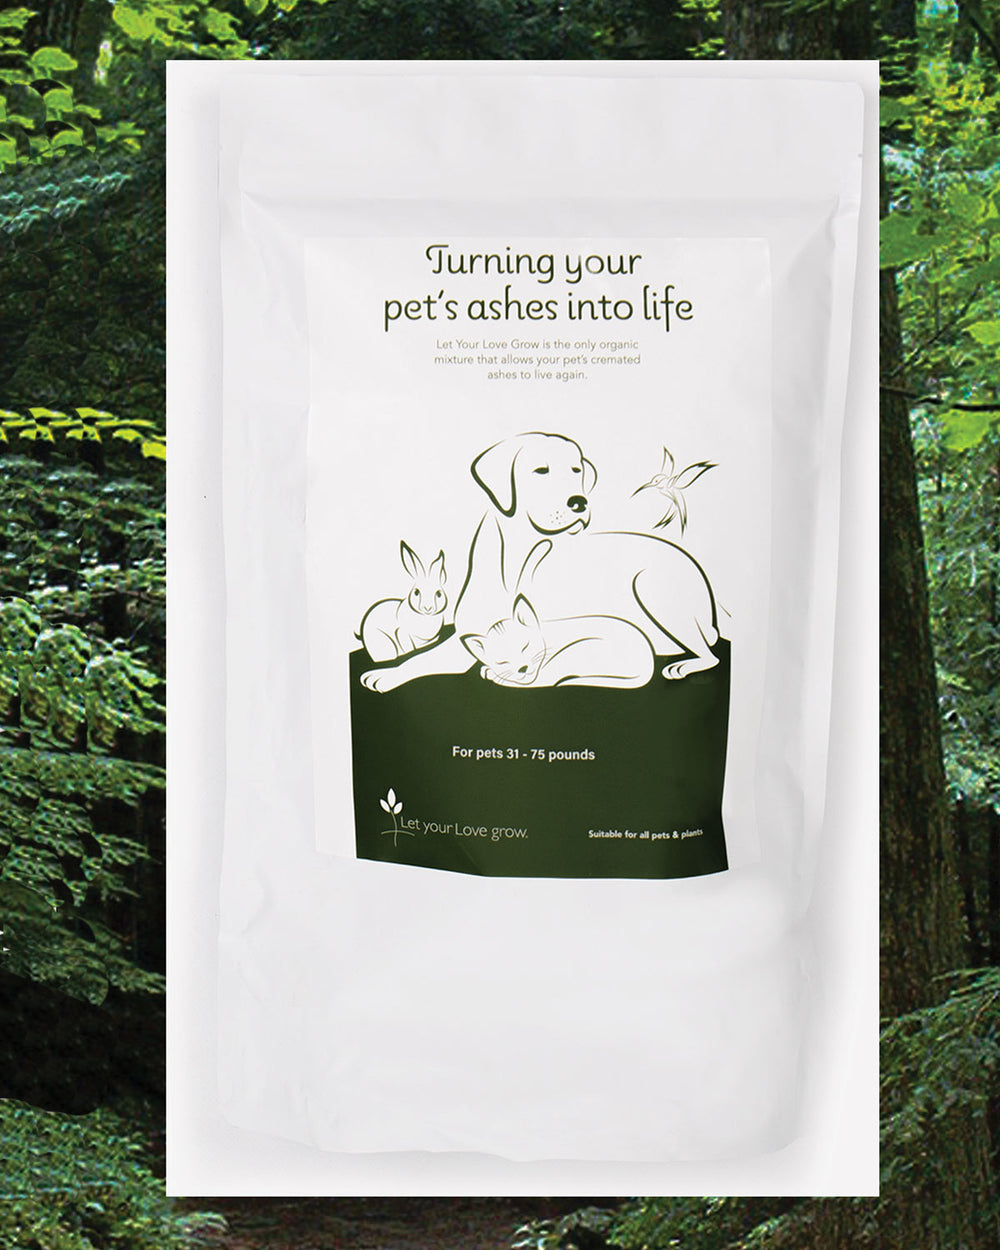 Let Your Love Grow - Turning Your Pet's Ashes into life